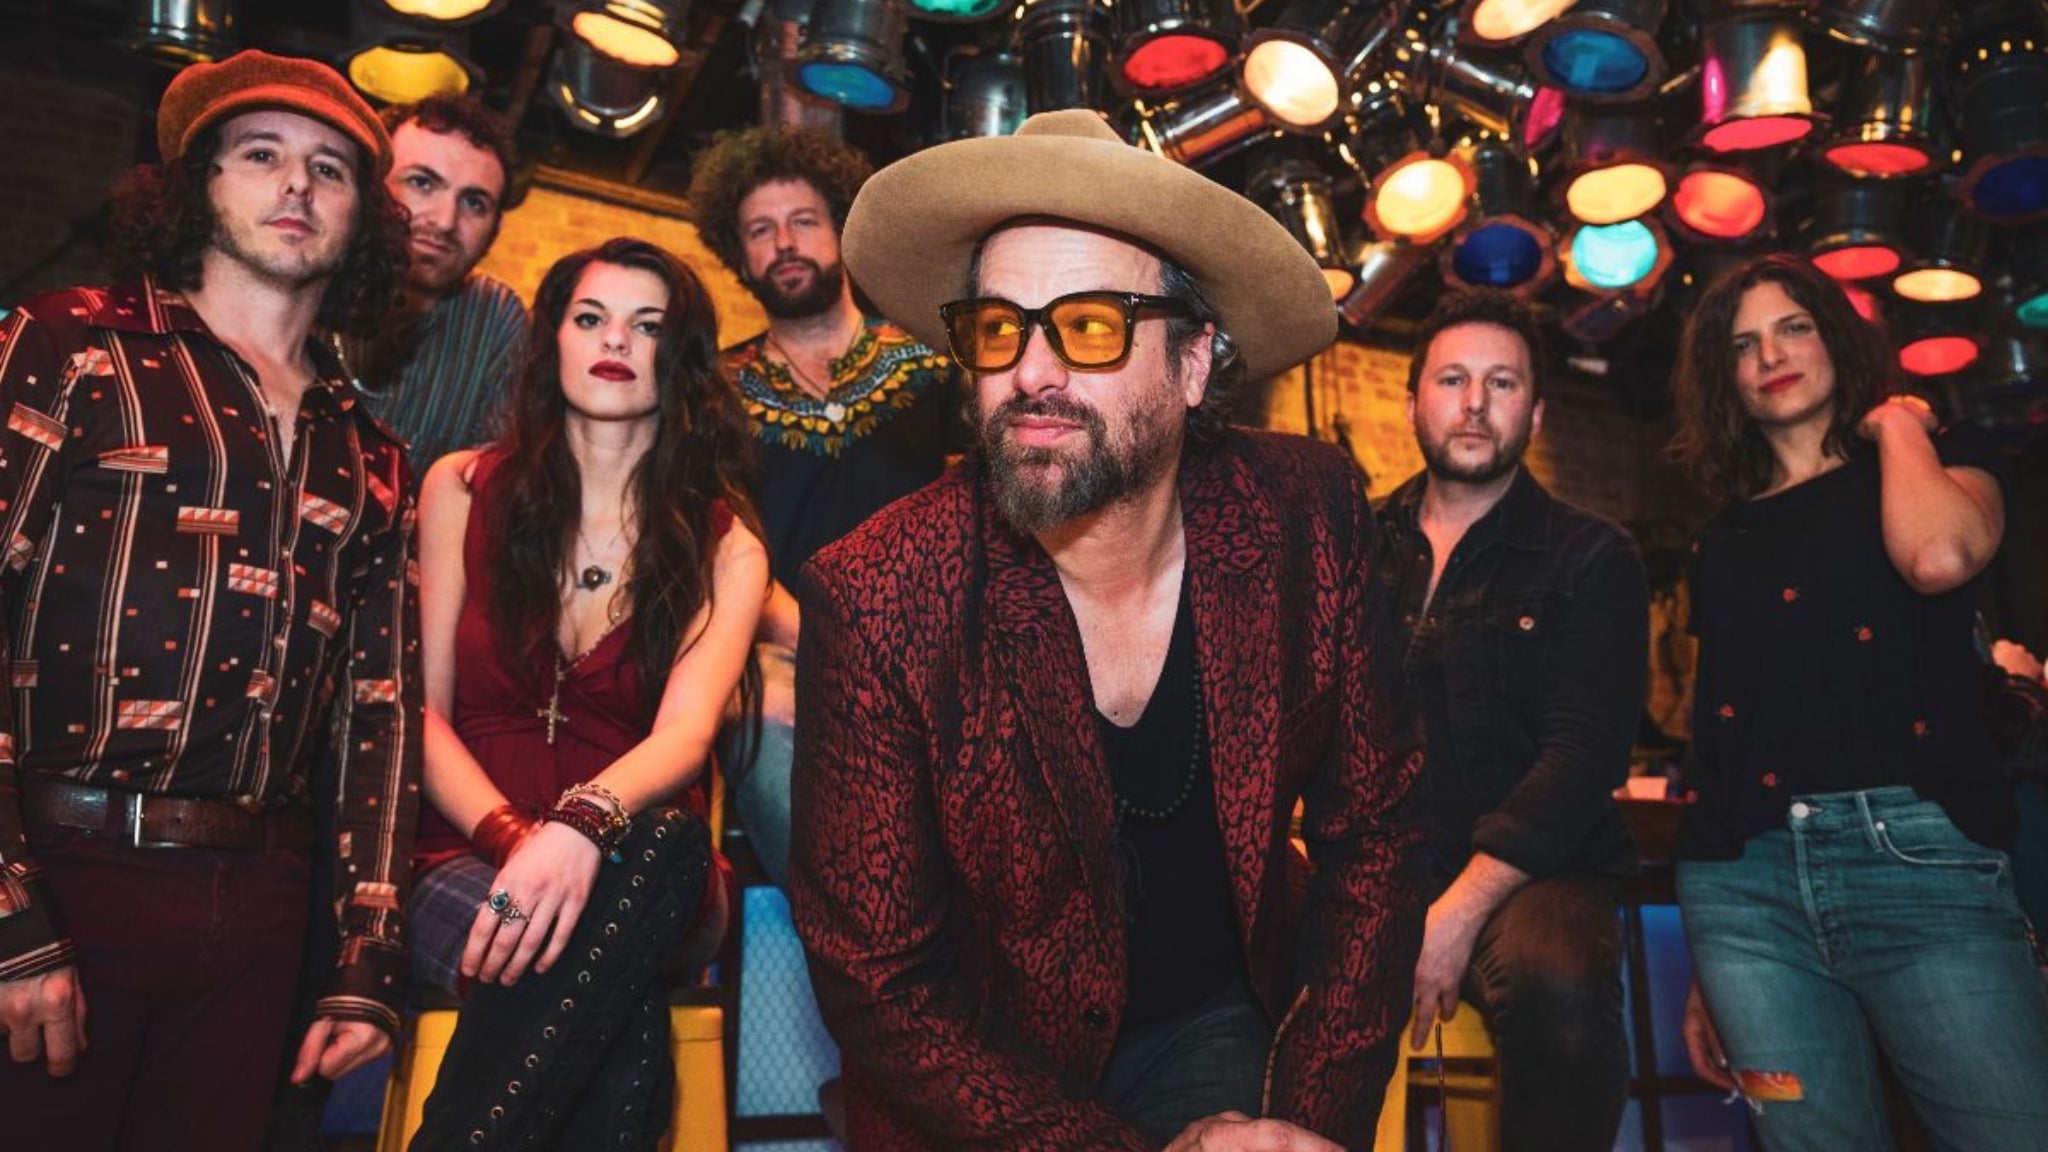 Uprooted Featuring Michael Glabicki of Rusted Root in Portsmouth promo photo for Inner Circle presale offer code